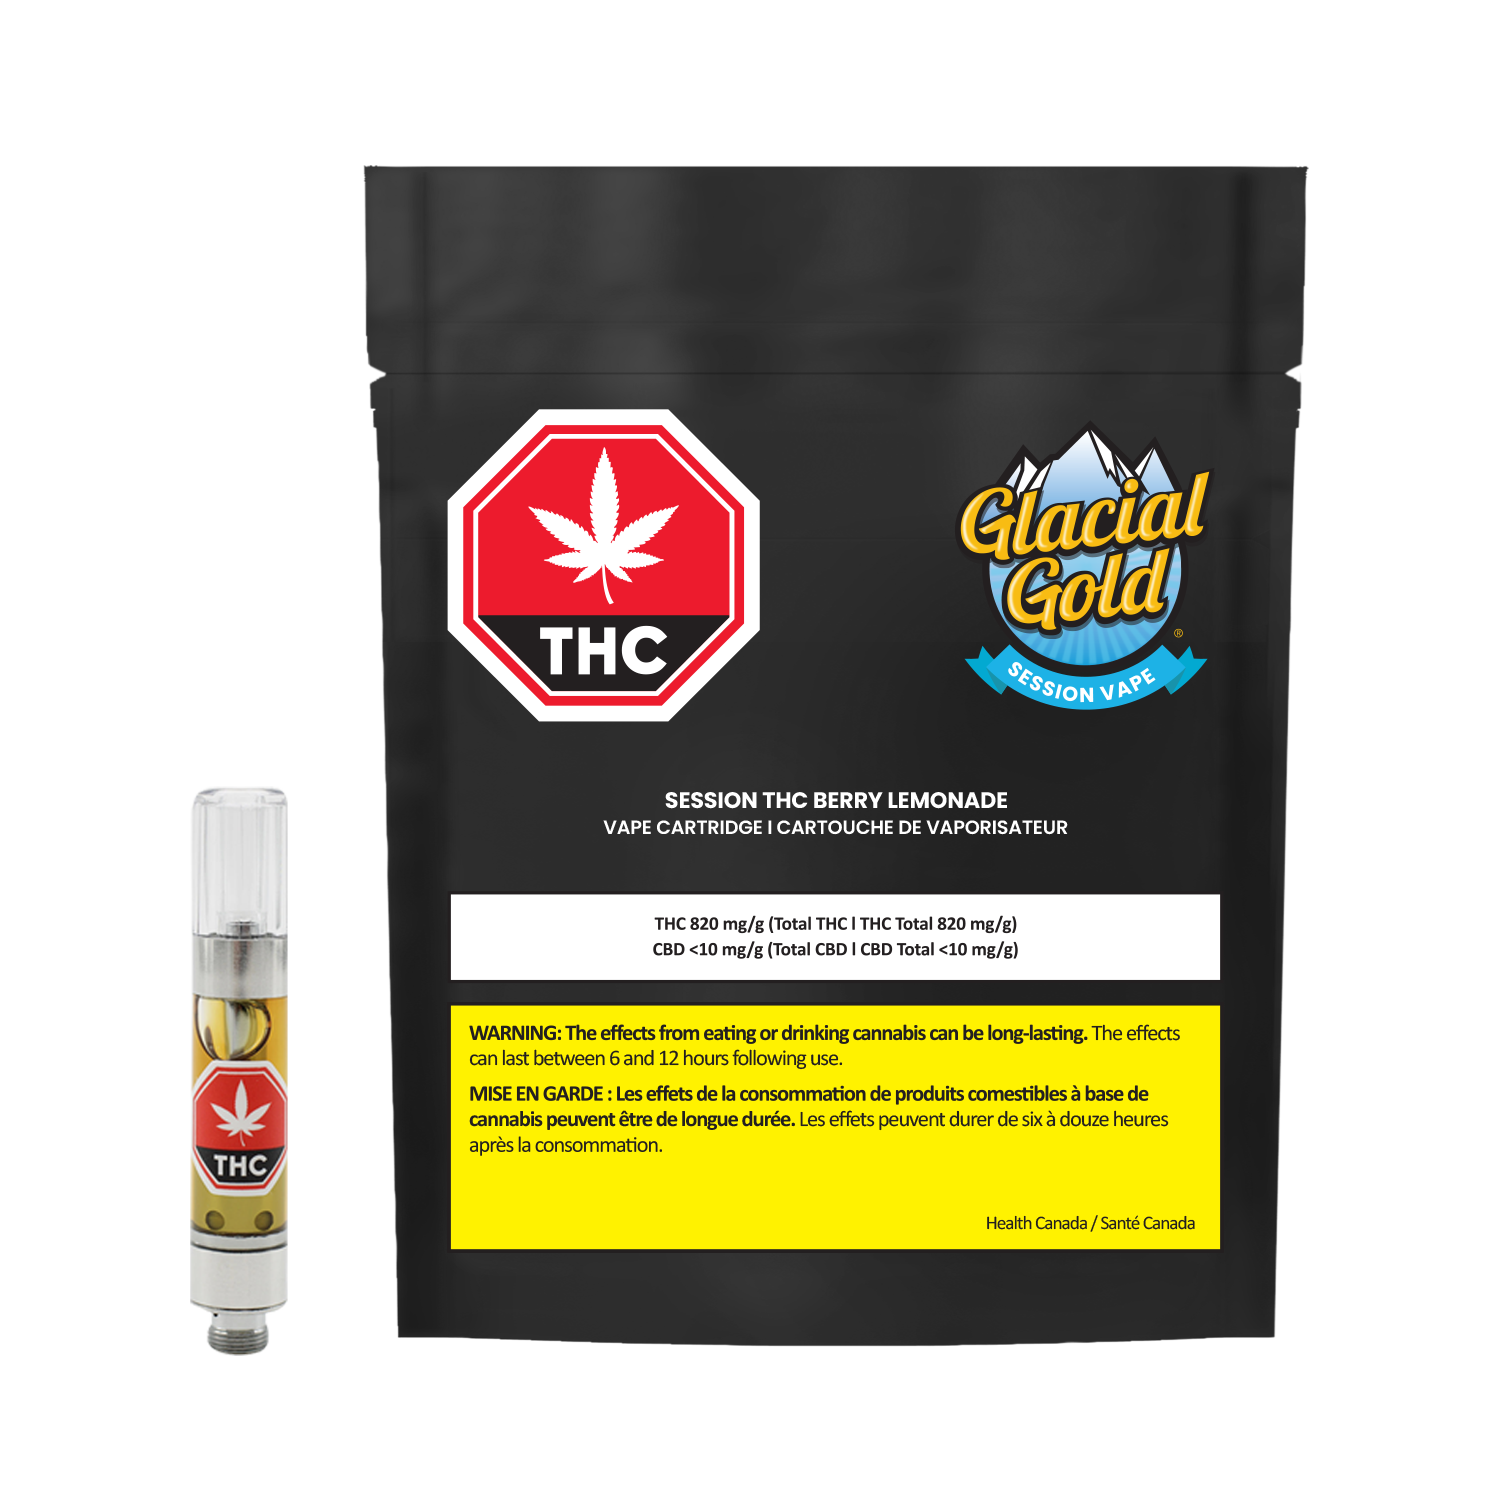 Cannabis Product Glacial Gold - Session THC Berry Lemonade 1g Vape by Glacial Gold - 1